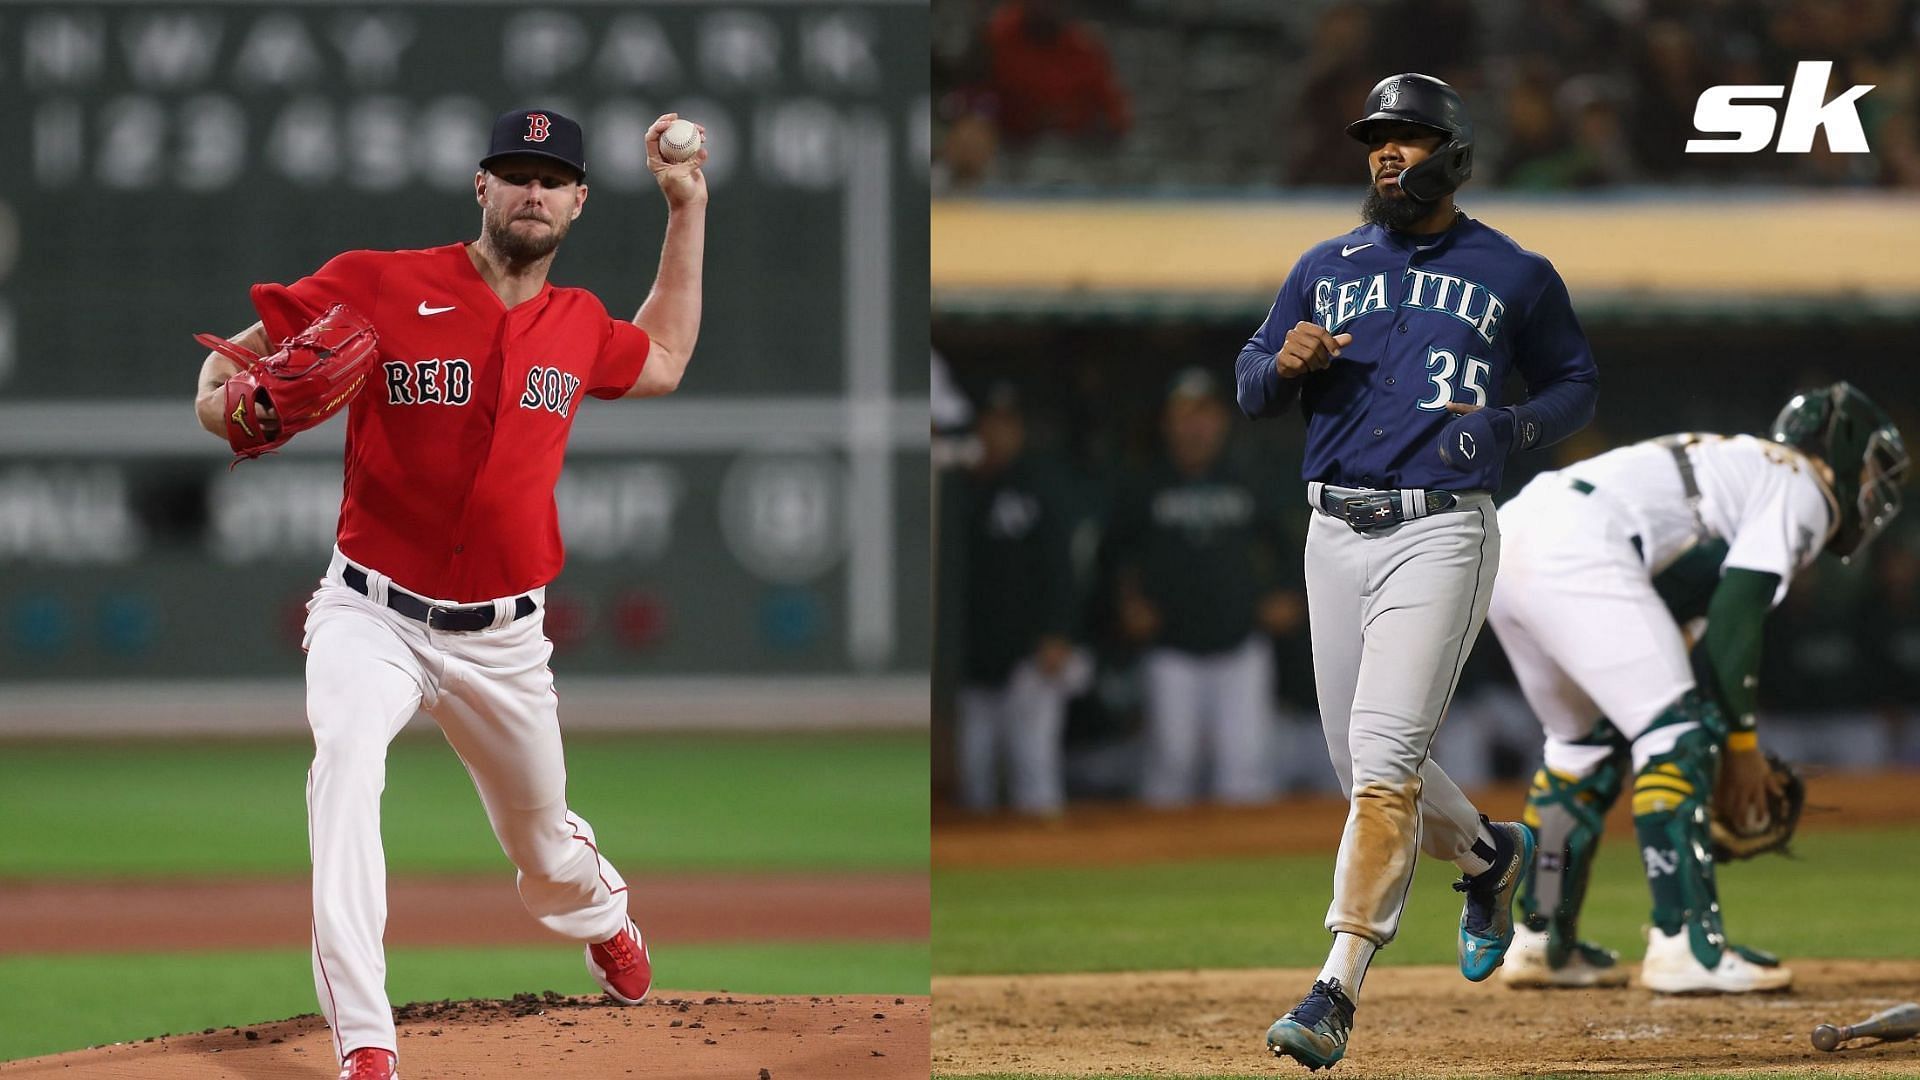 Chris Sale and Teoscar Hernandez are two players who may see a rise in the MLB fantasy rankings